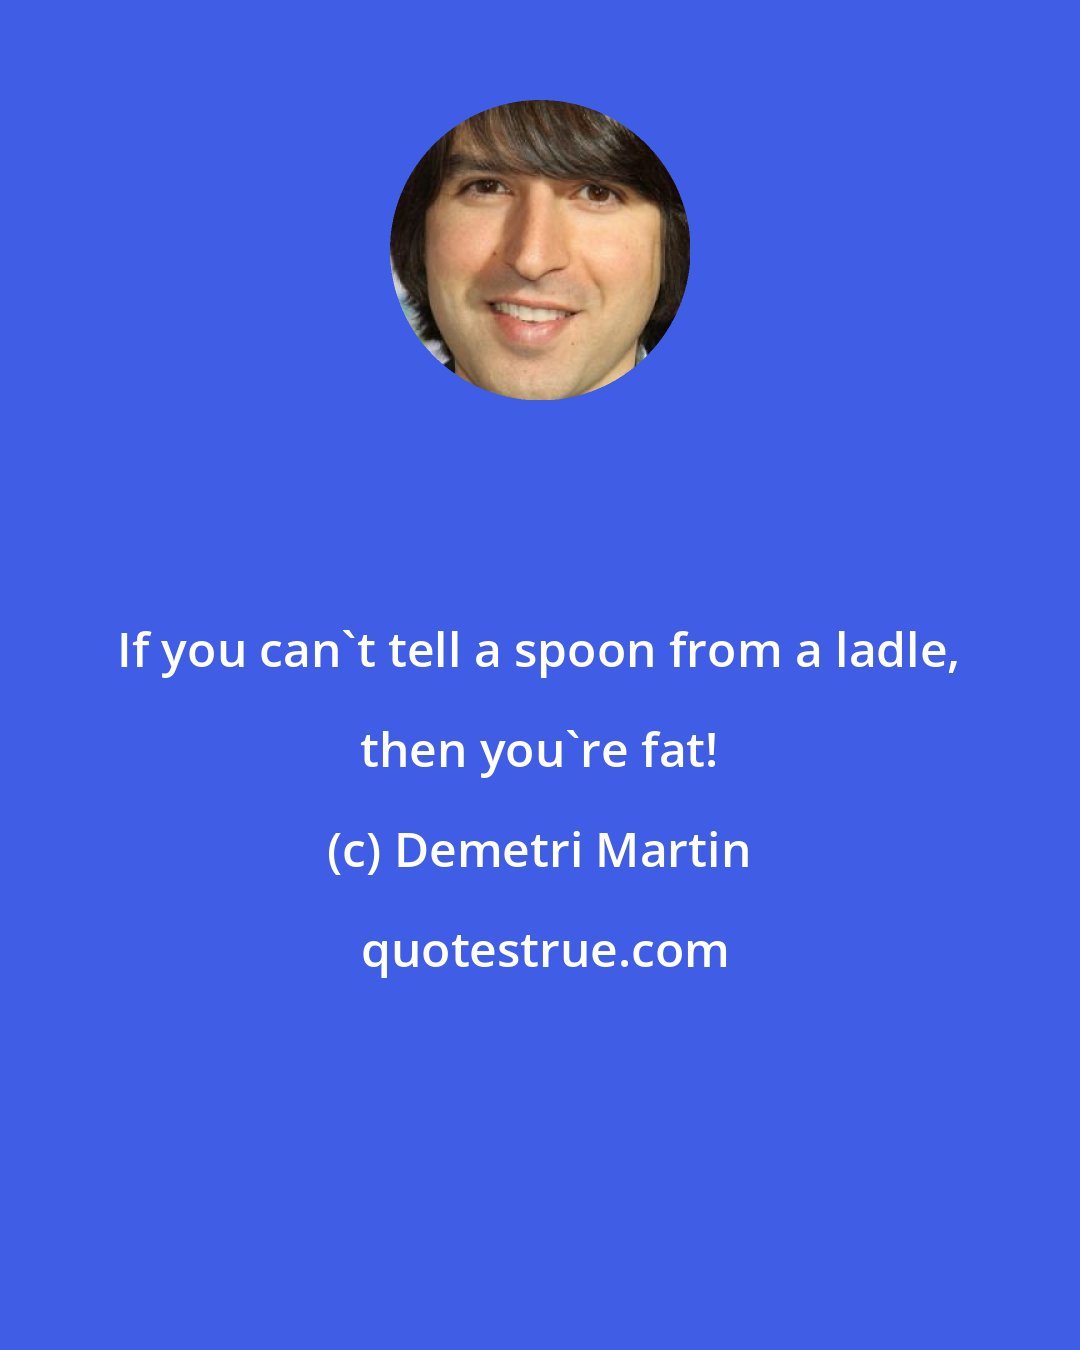 Demetri Martin: If you can't tell a spoon from a ladle, then you're fat!